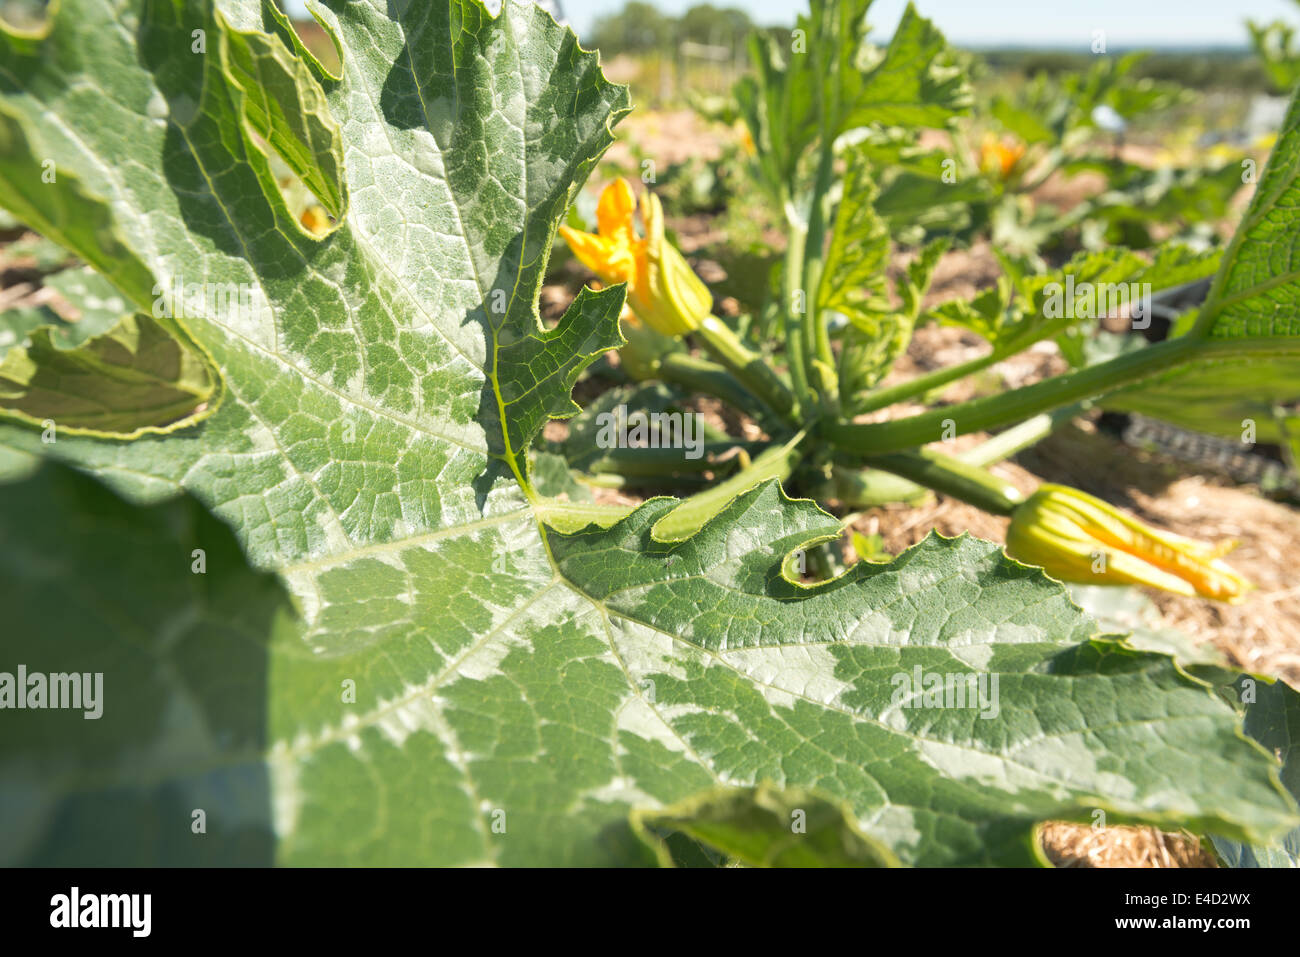 Squash courgette marrow organic crop flowering Summer crop ripening hidden beneath a mass of protective leaves in field Stock Photo